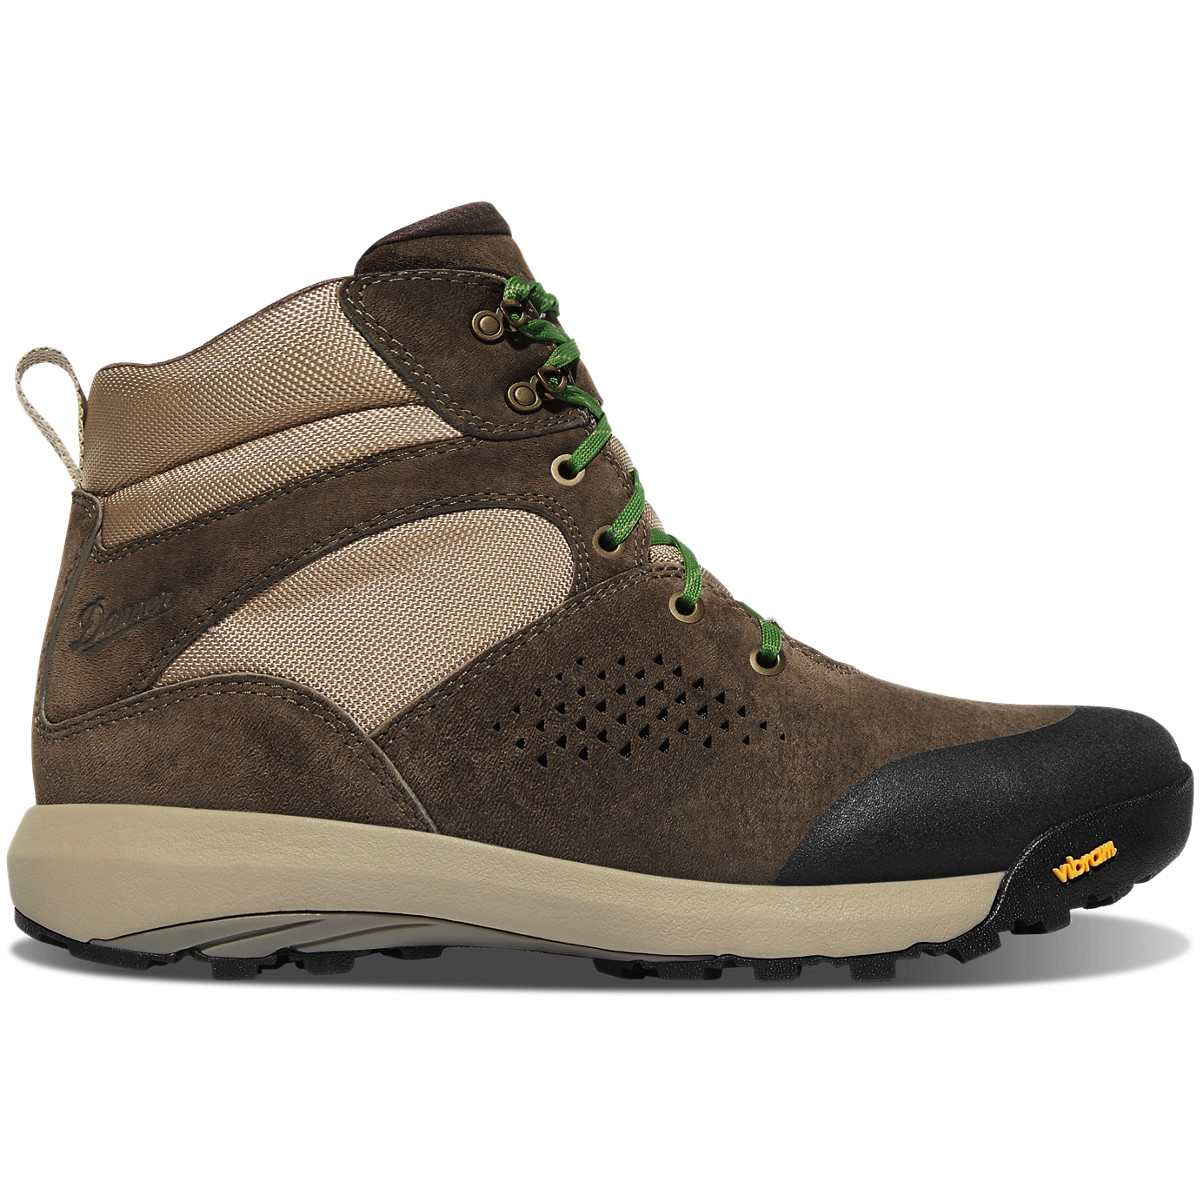 Danner Womens Inquire Mid 5 Waterproof Lifestyle Boot 